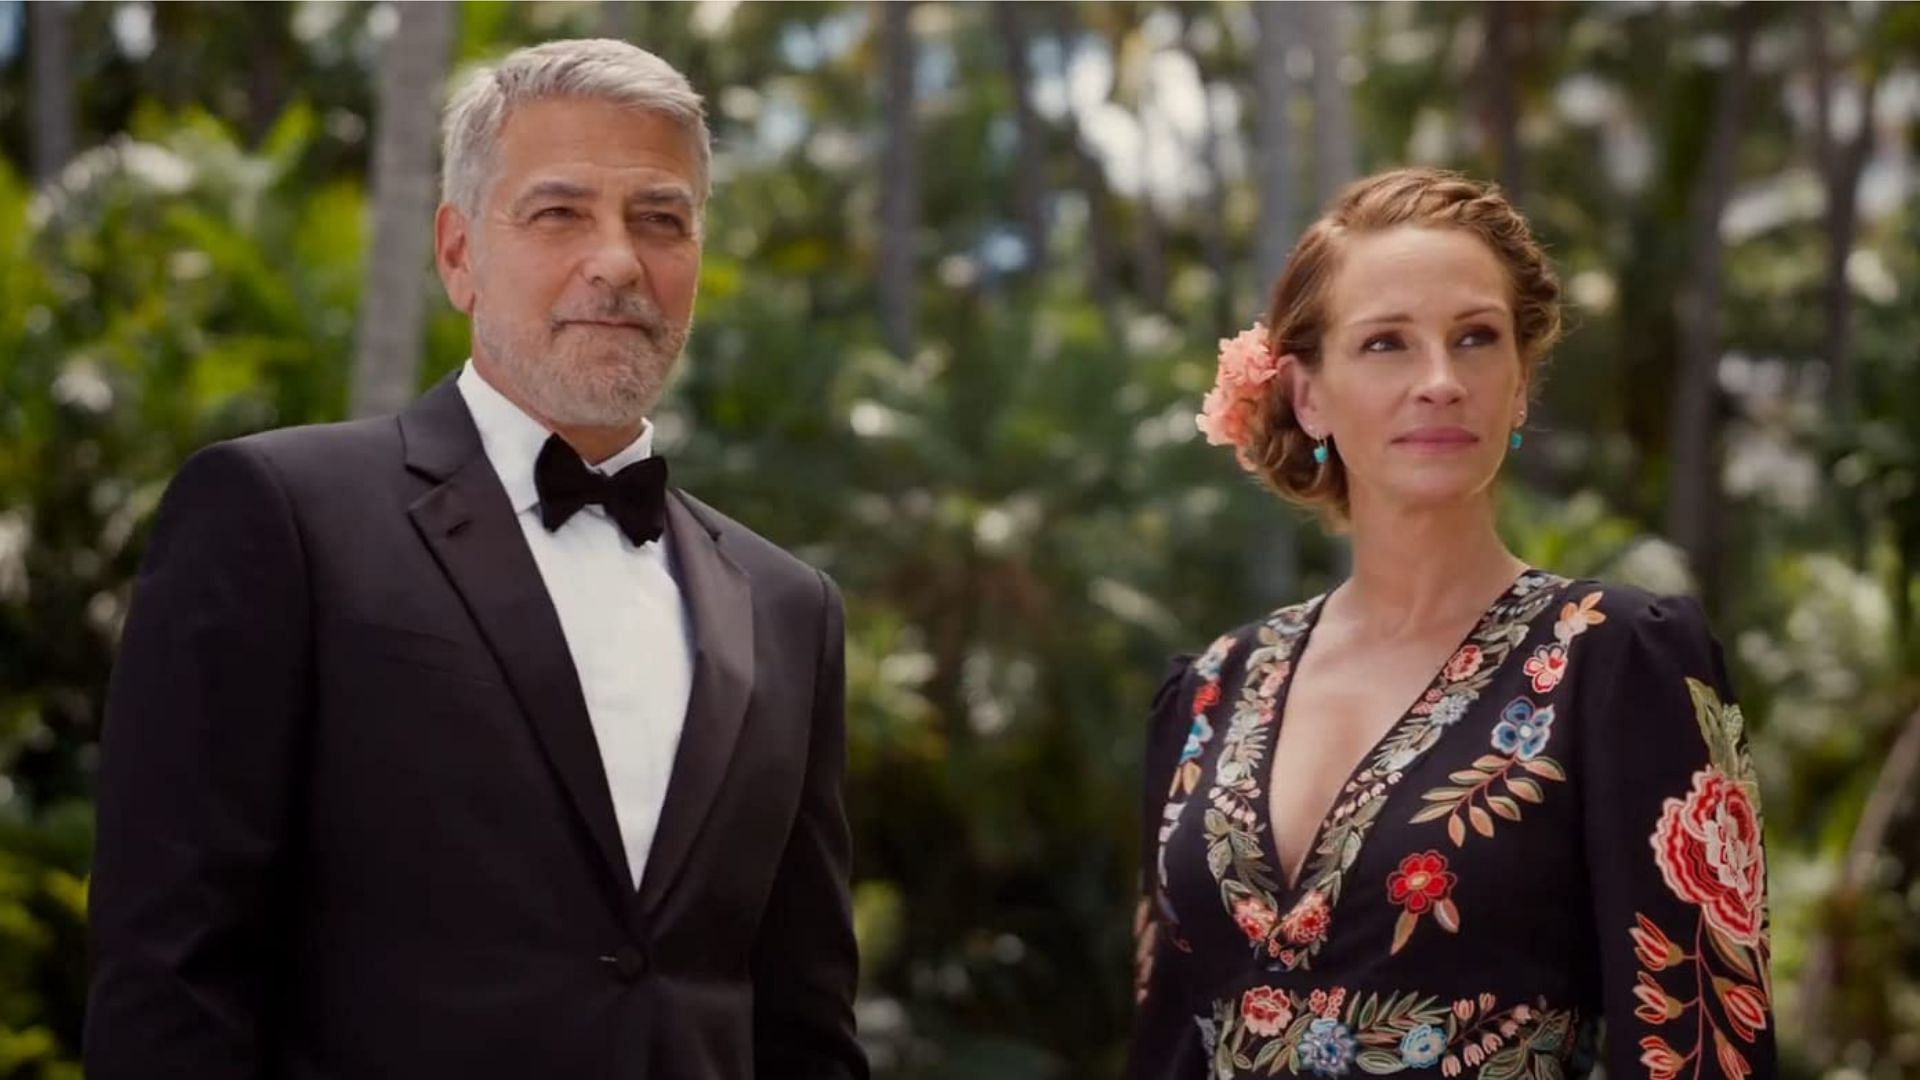 George Clooney and Julia Roberts in still from Ticket to Paradise (Image via IMDB)